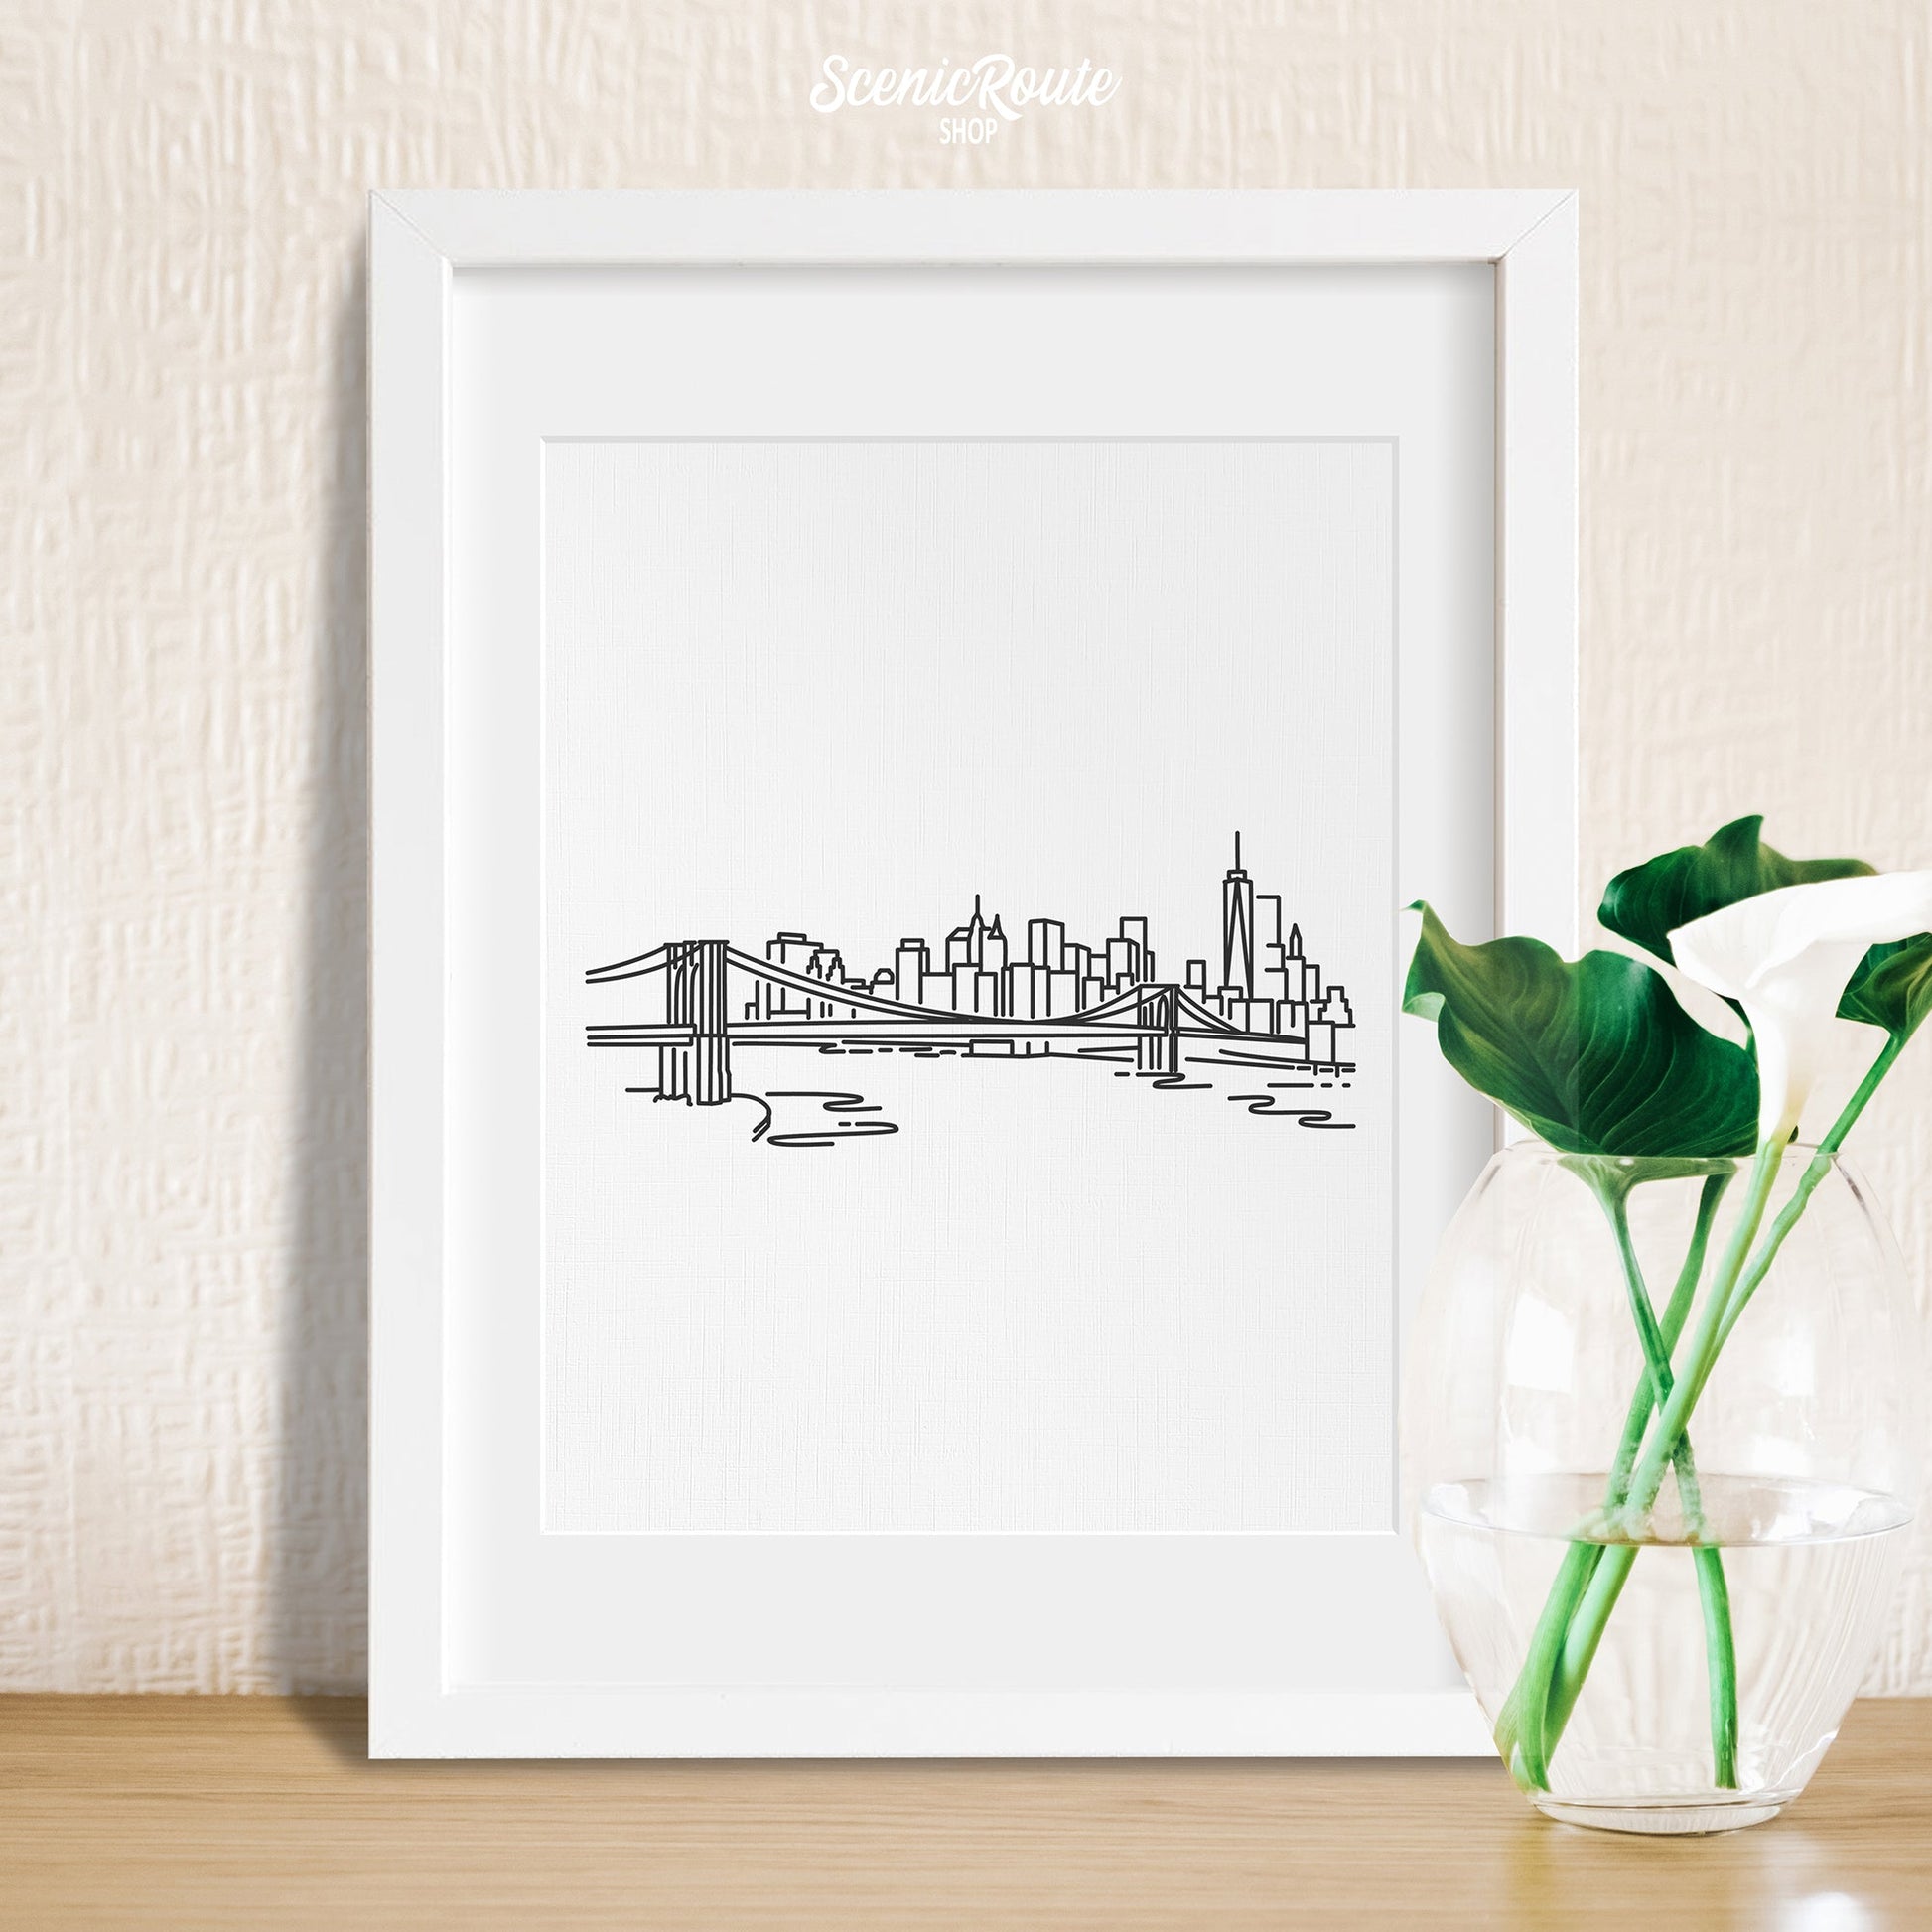 A framed line art drawing of the New York City Skyline with a vase